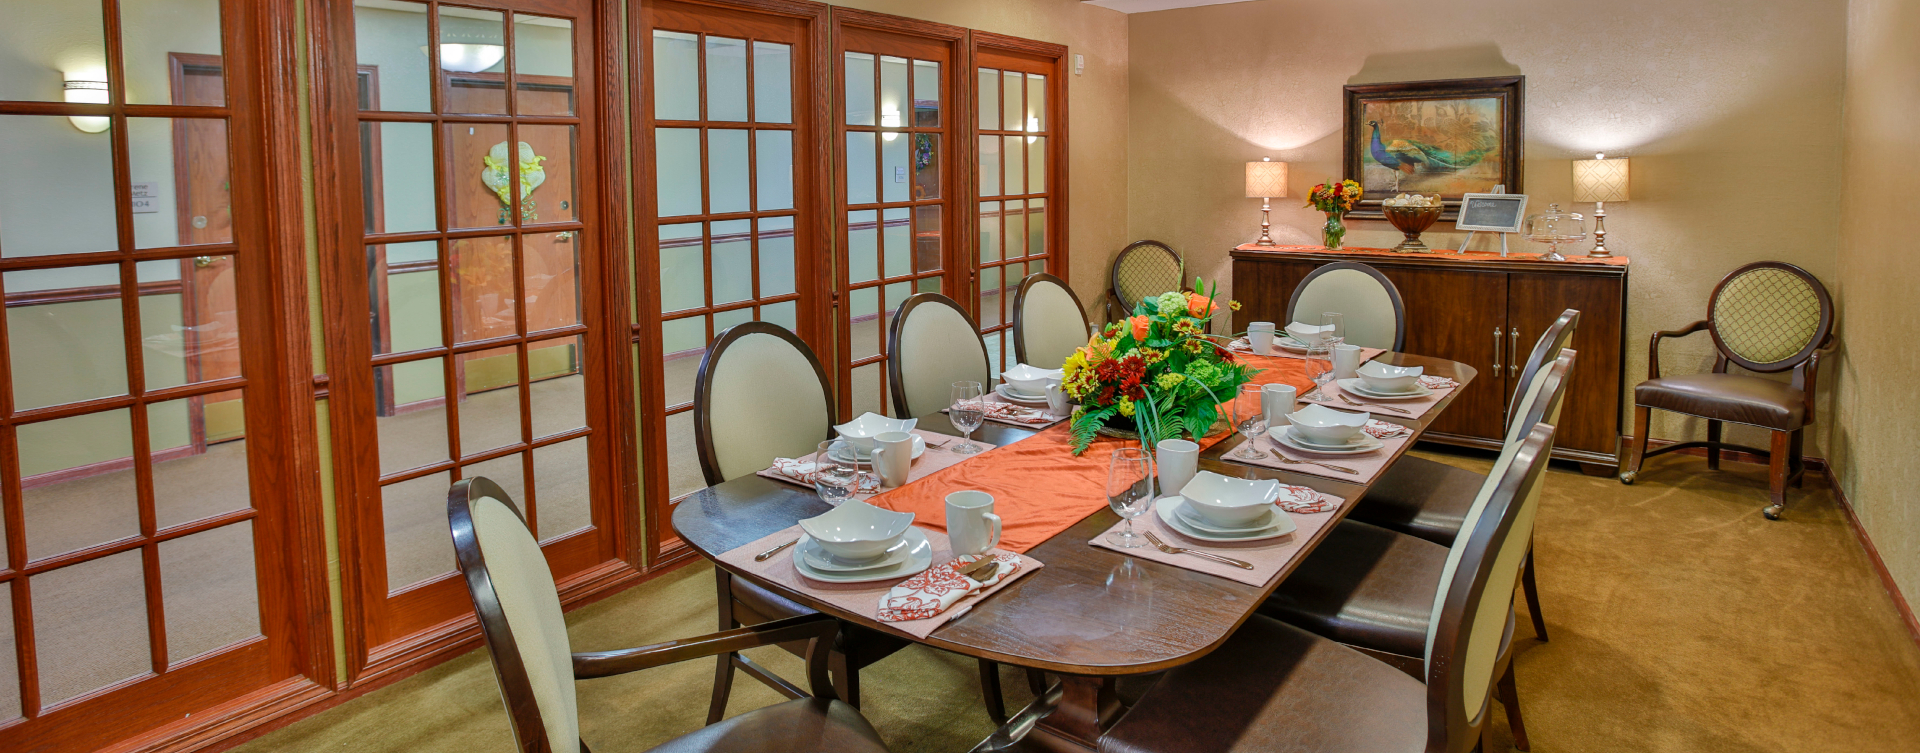 Food is best when shared with family and friends in the private dining room at Bickford of Springfield